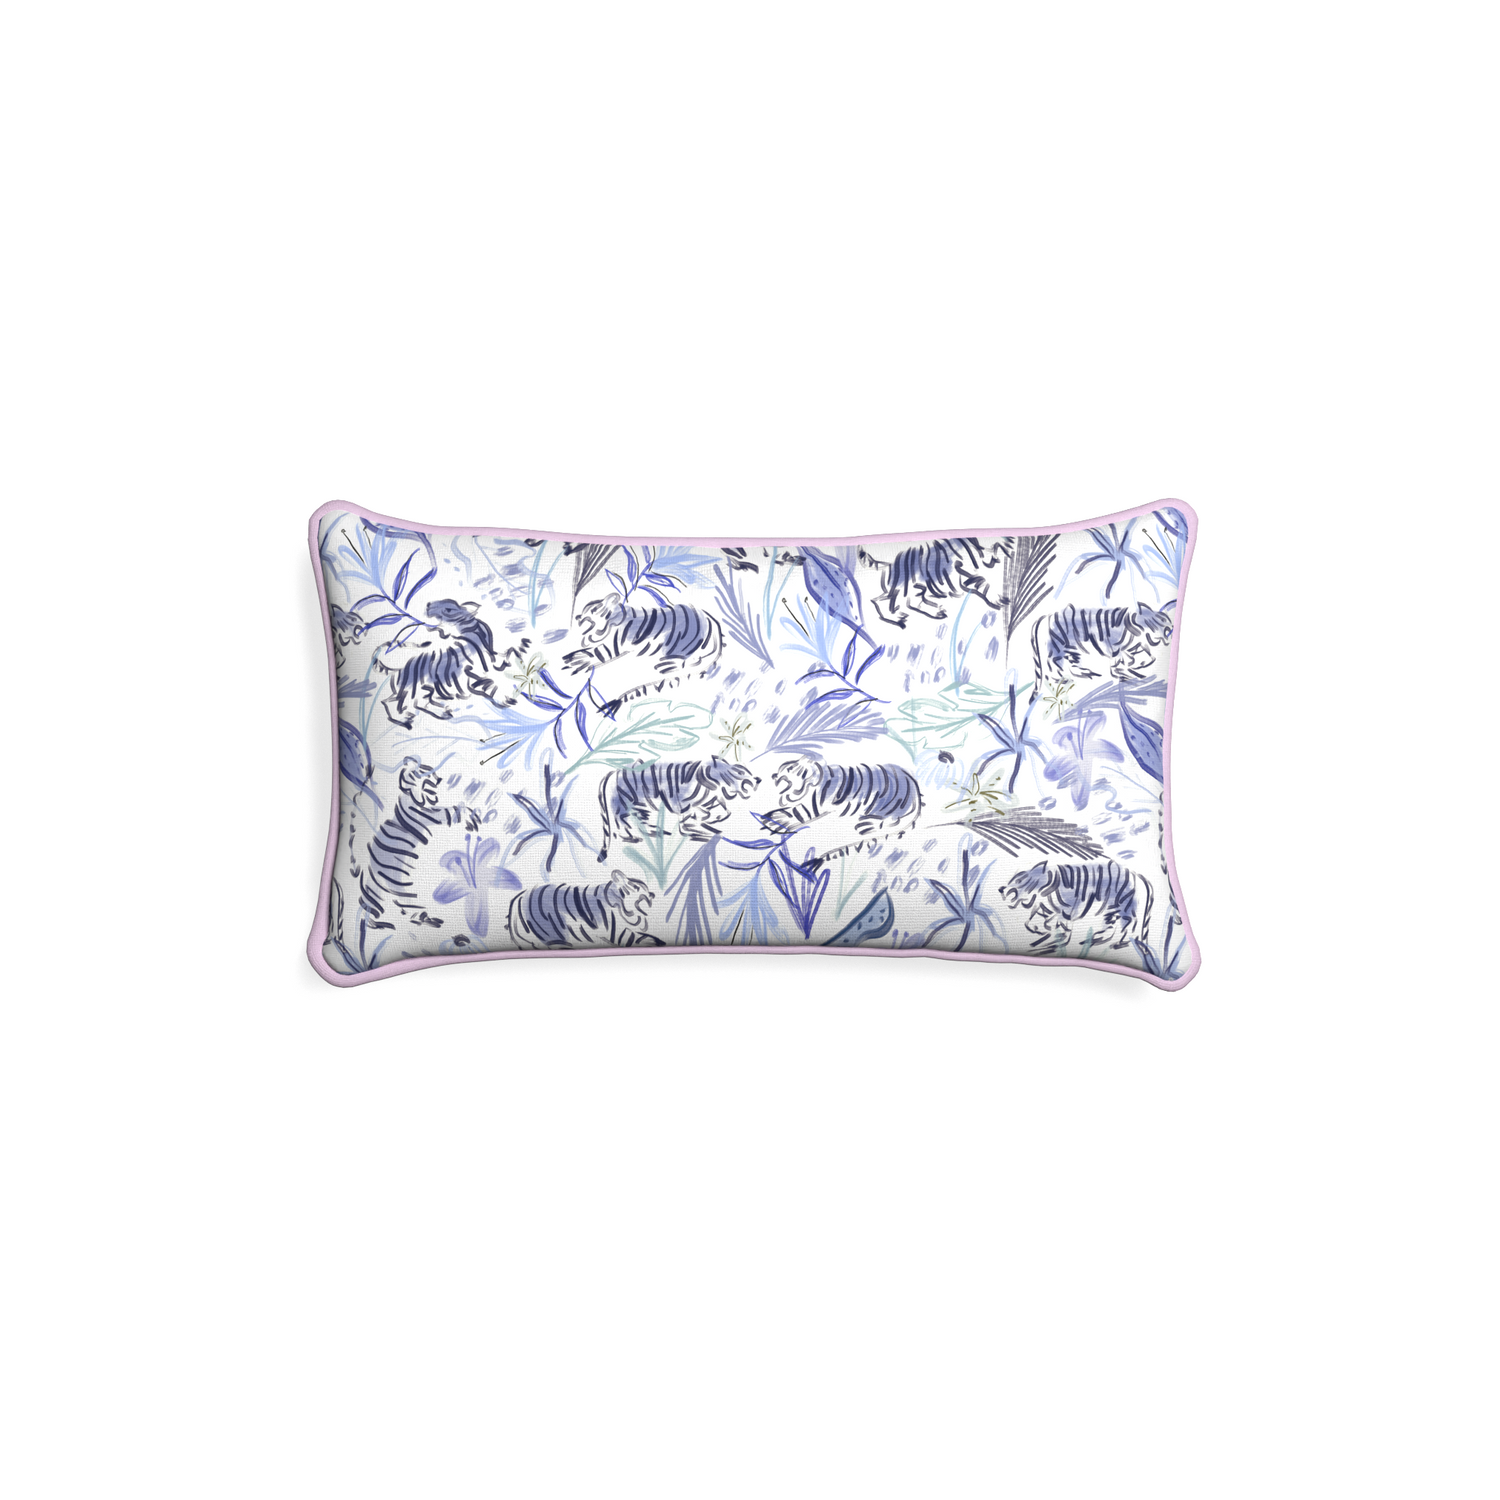 Petite-lumbar frida blue custom blue with intricate tiger designpillow with l piping on white background